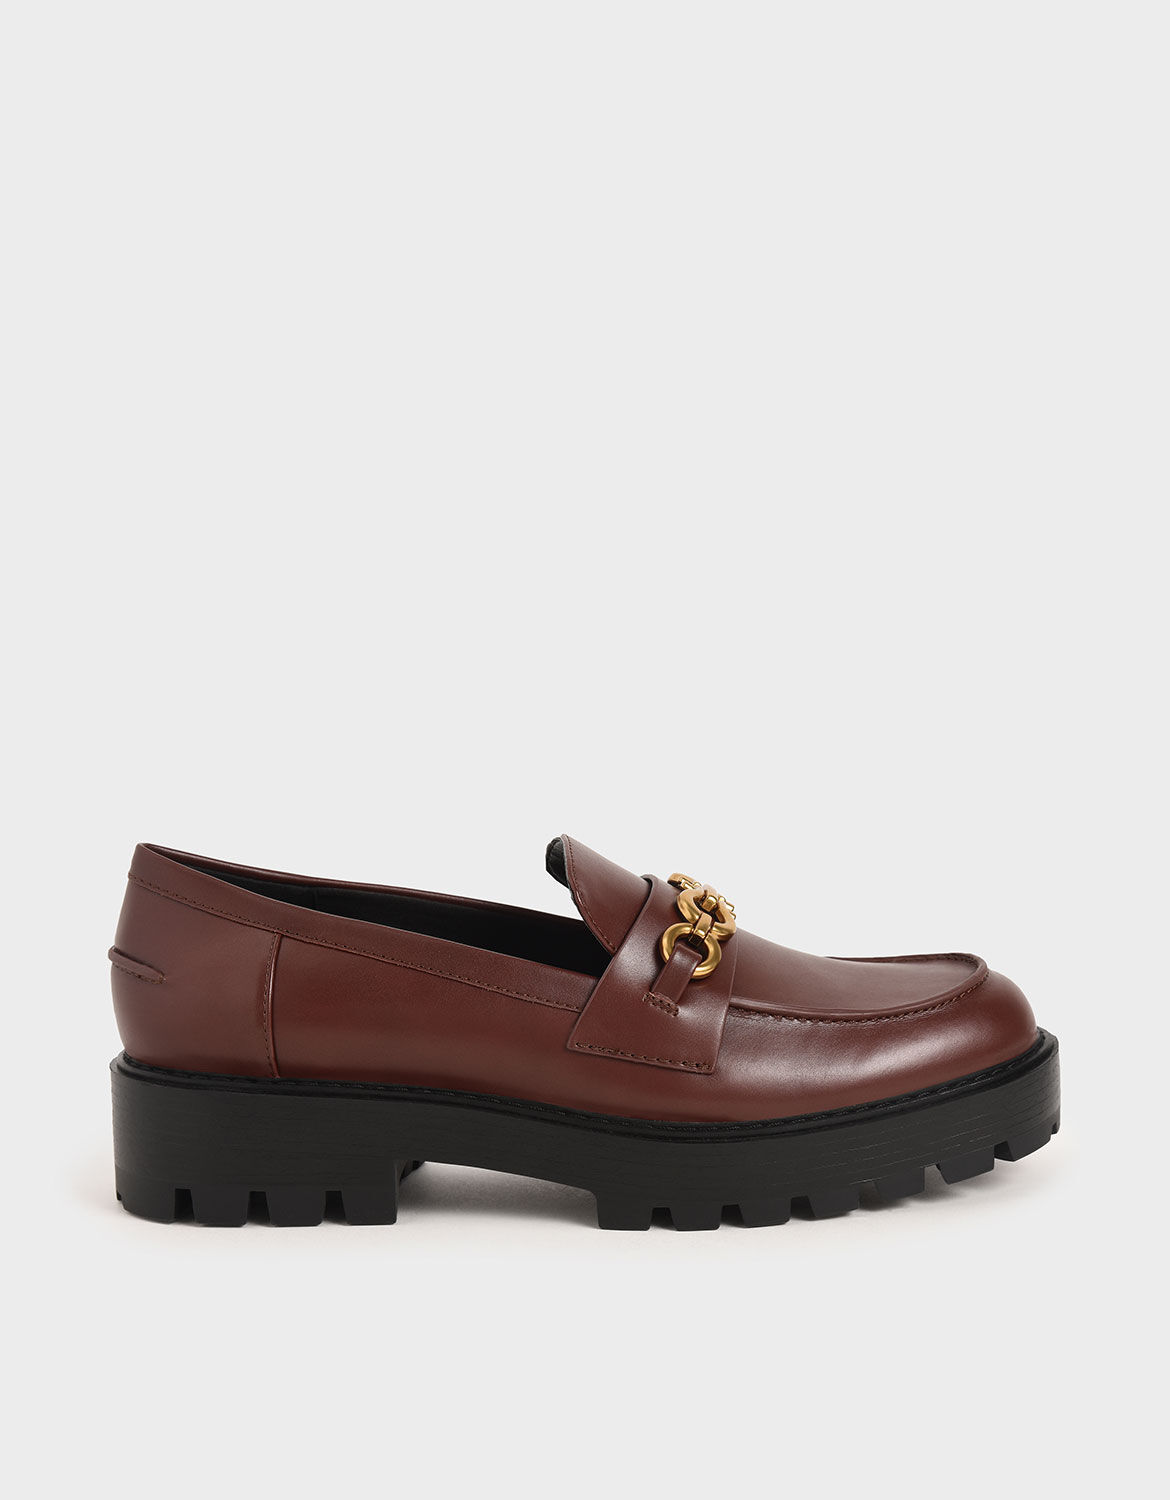 chunky tan loafers